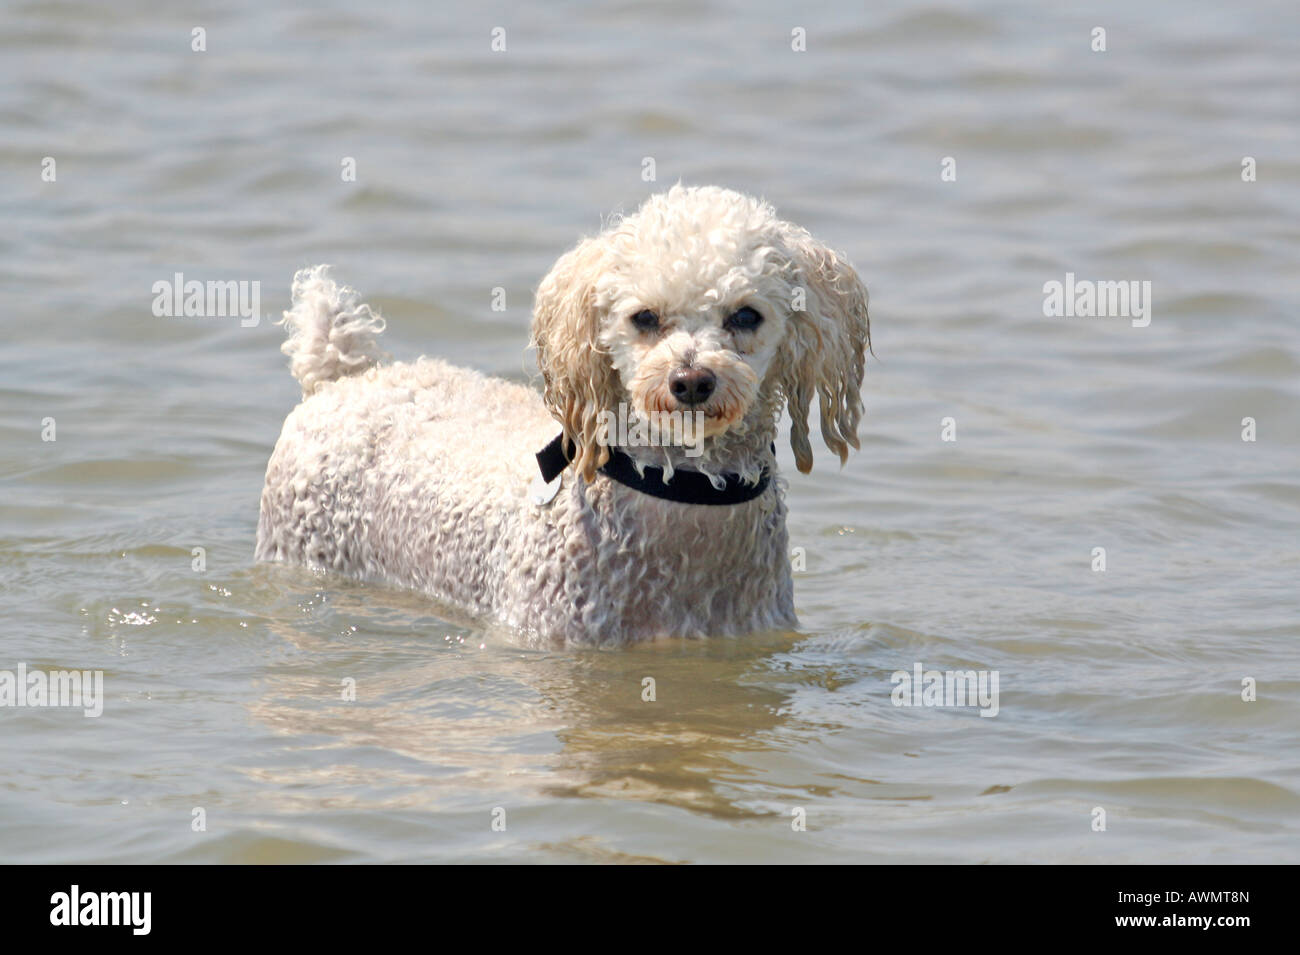 White Wet Poodle Dog in the Sea Looking at Camera Stock Photo